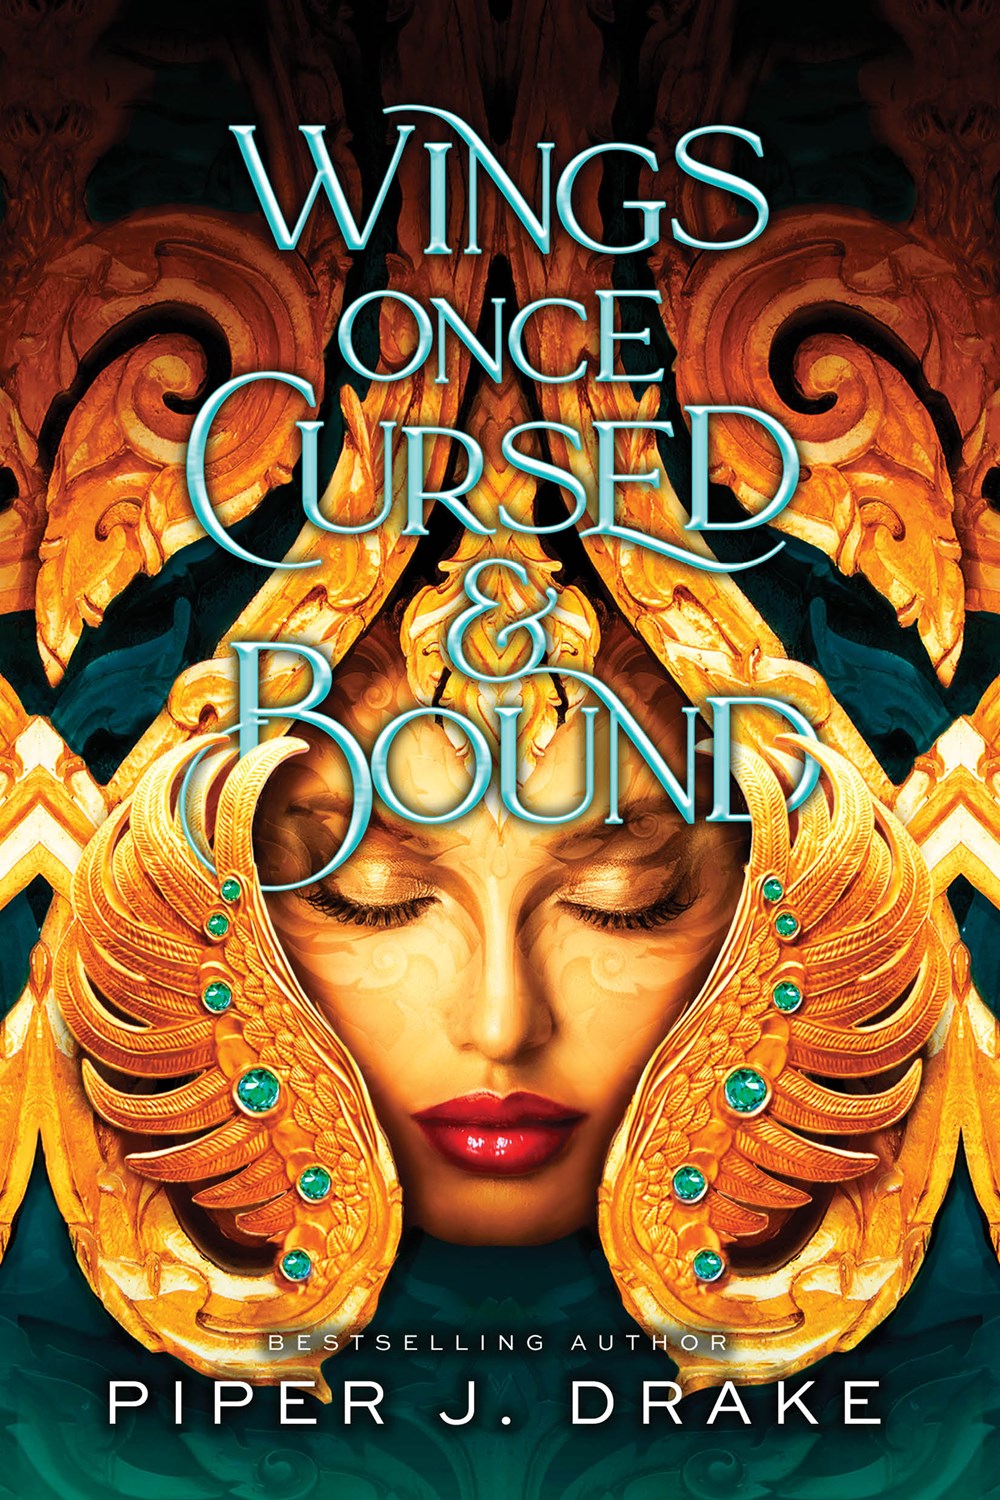 Wings Once Cursed & Bound by Piper J. Drake